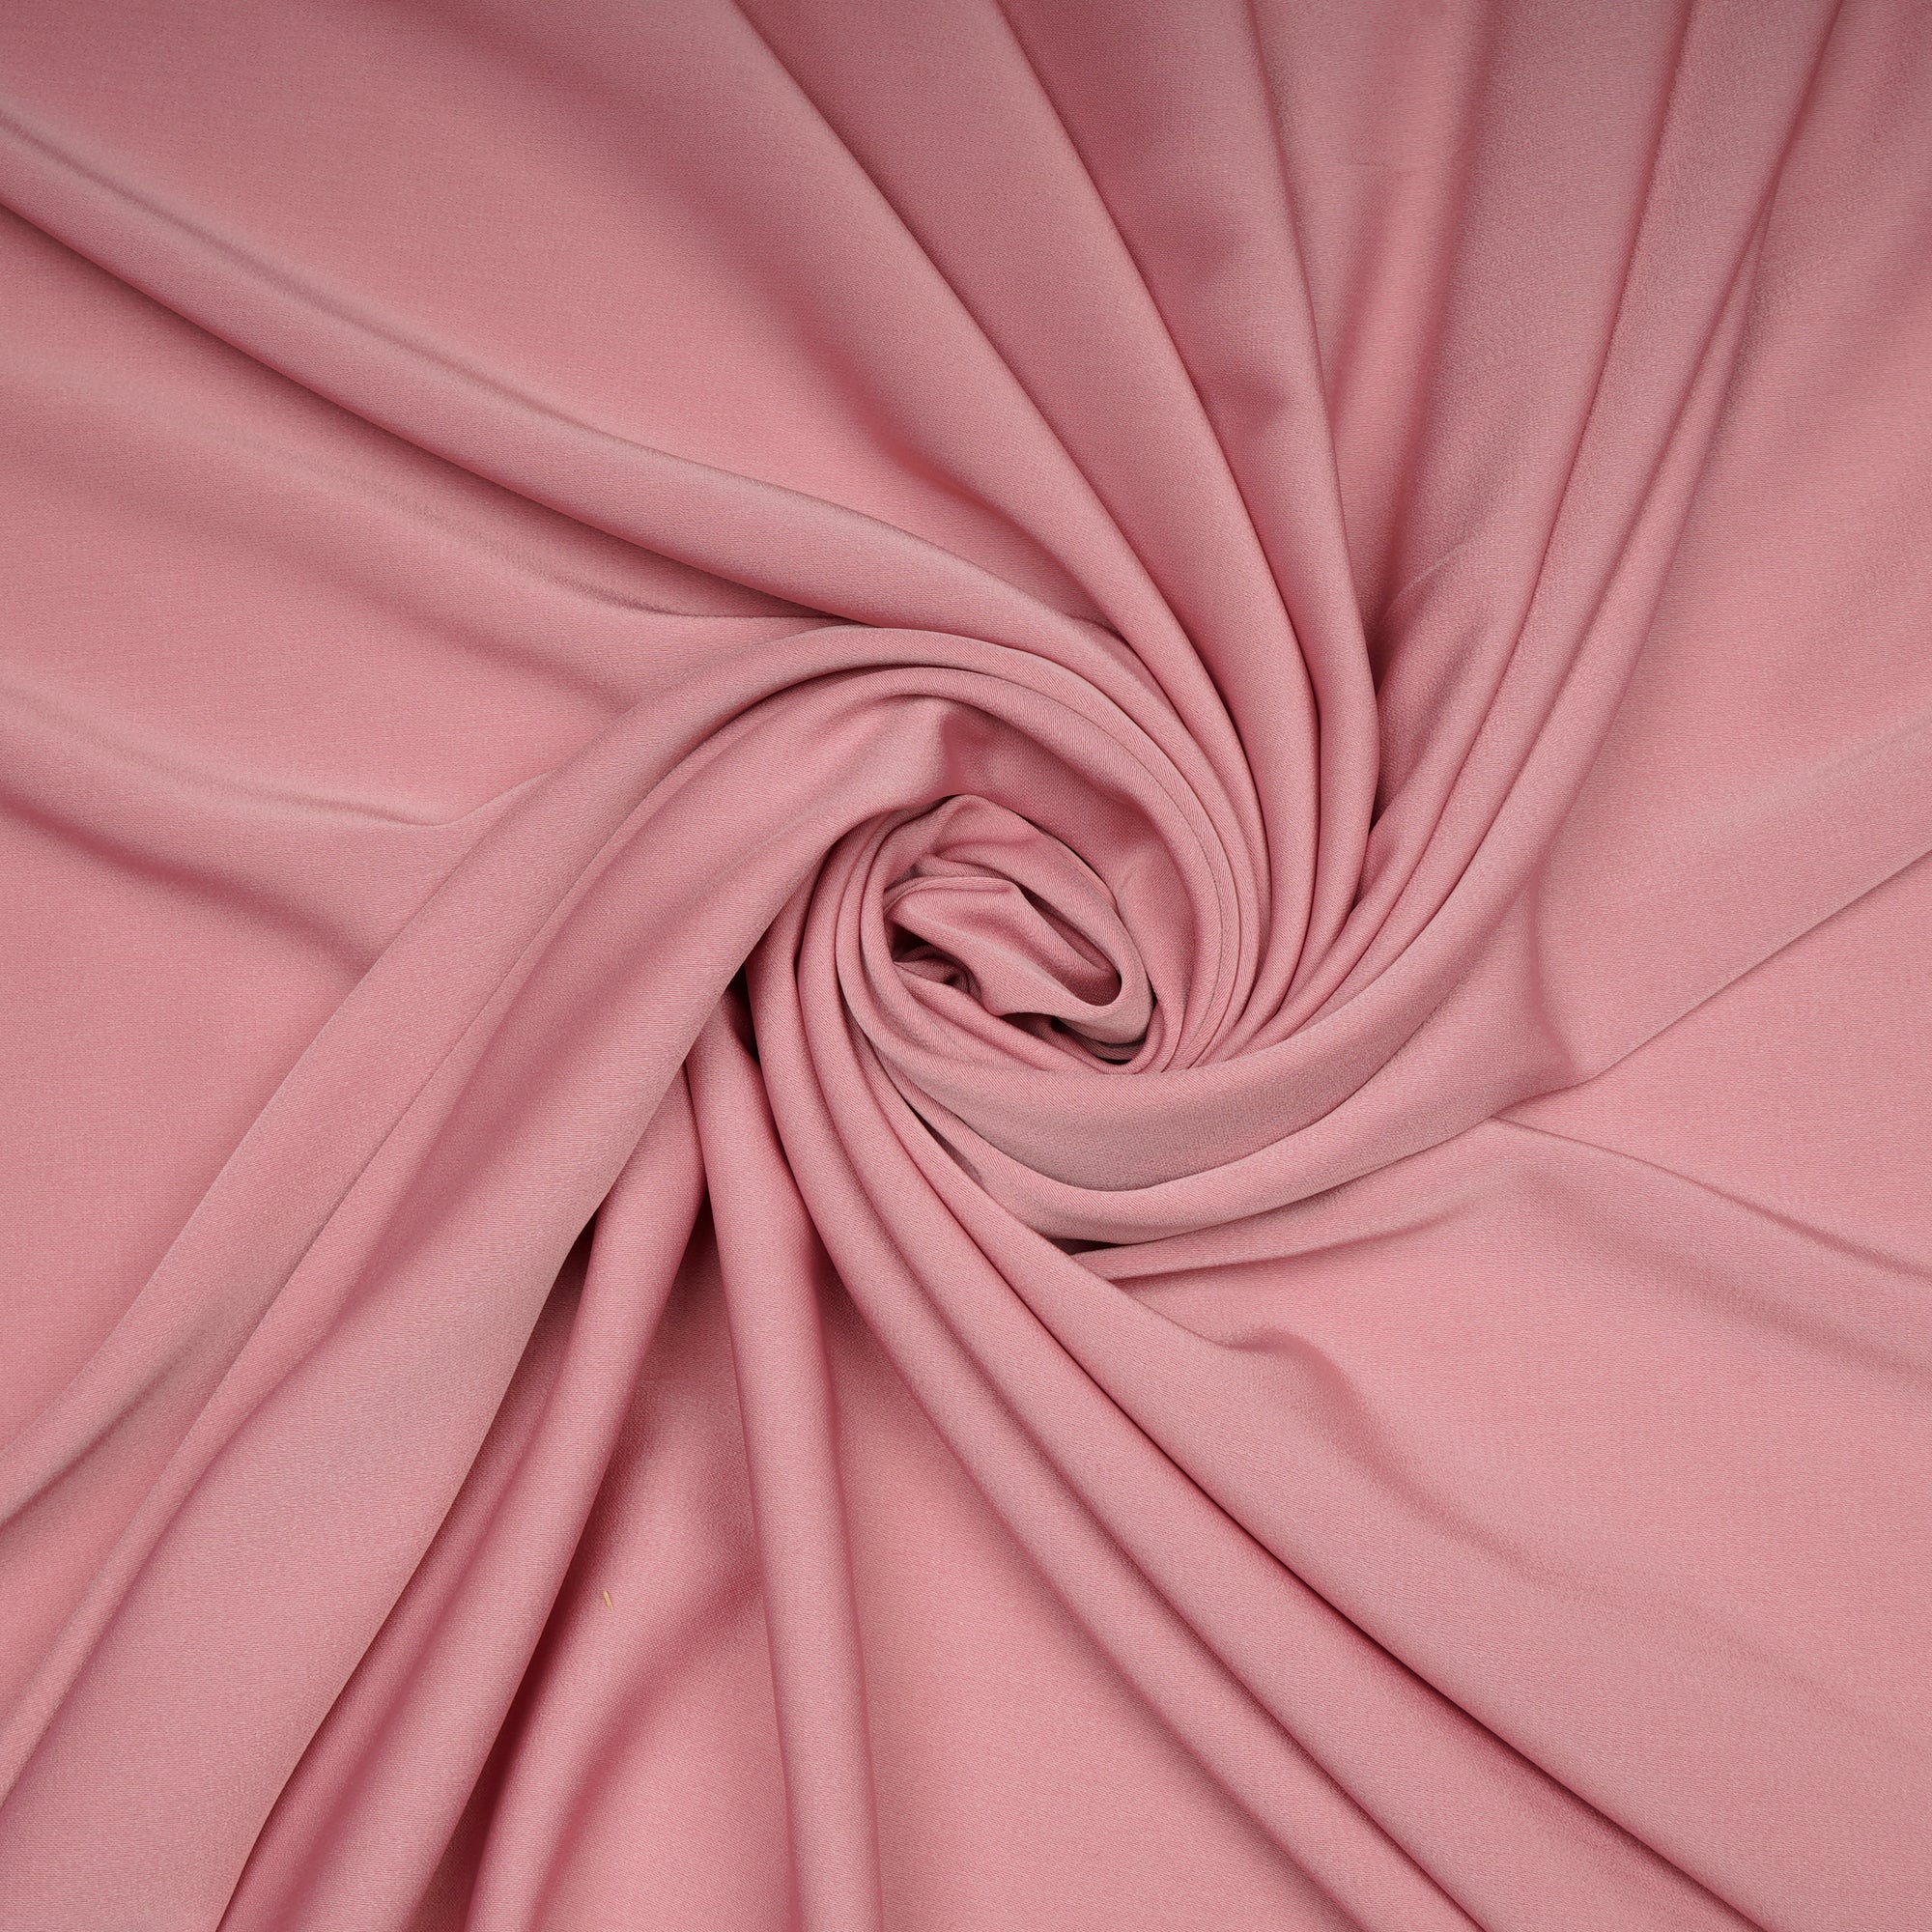 Peach Solid Dyed Imported Prada Crepe Fabric (60" Width)